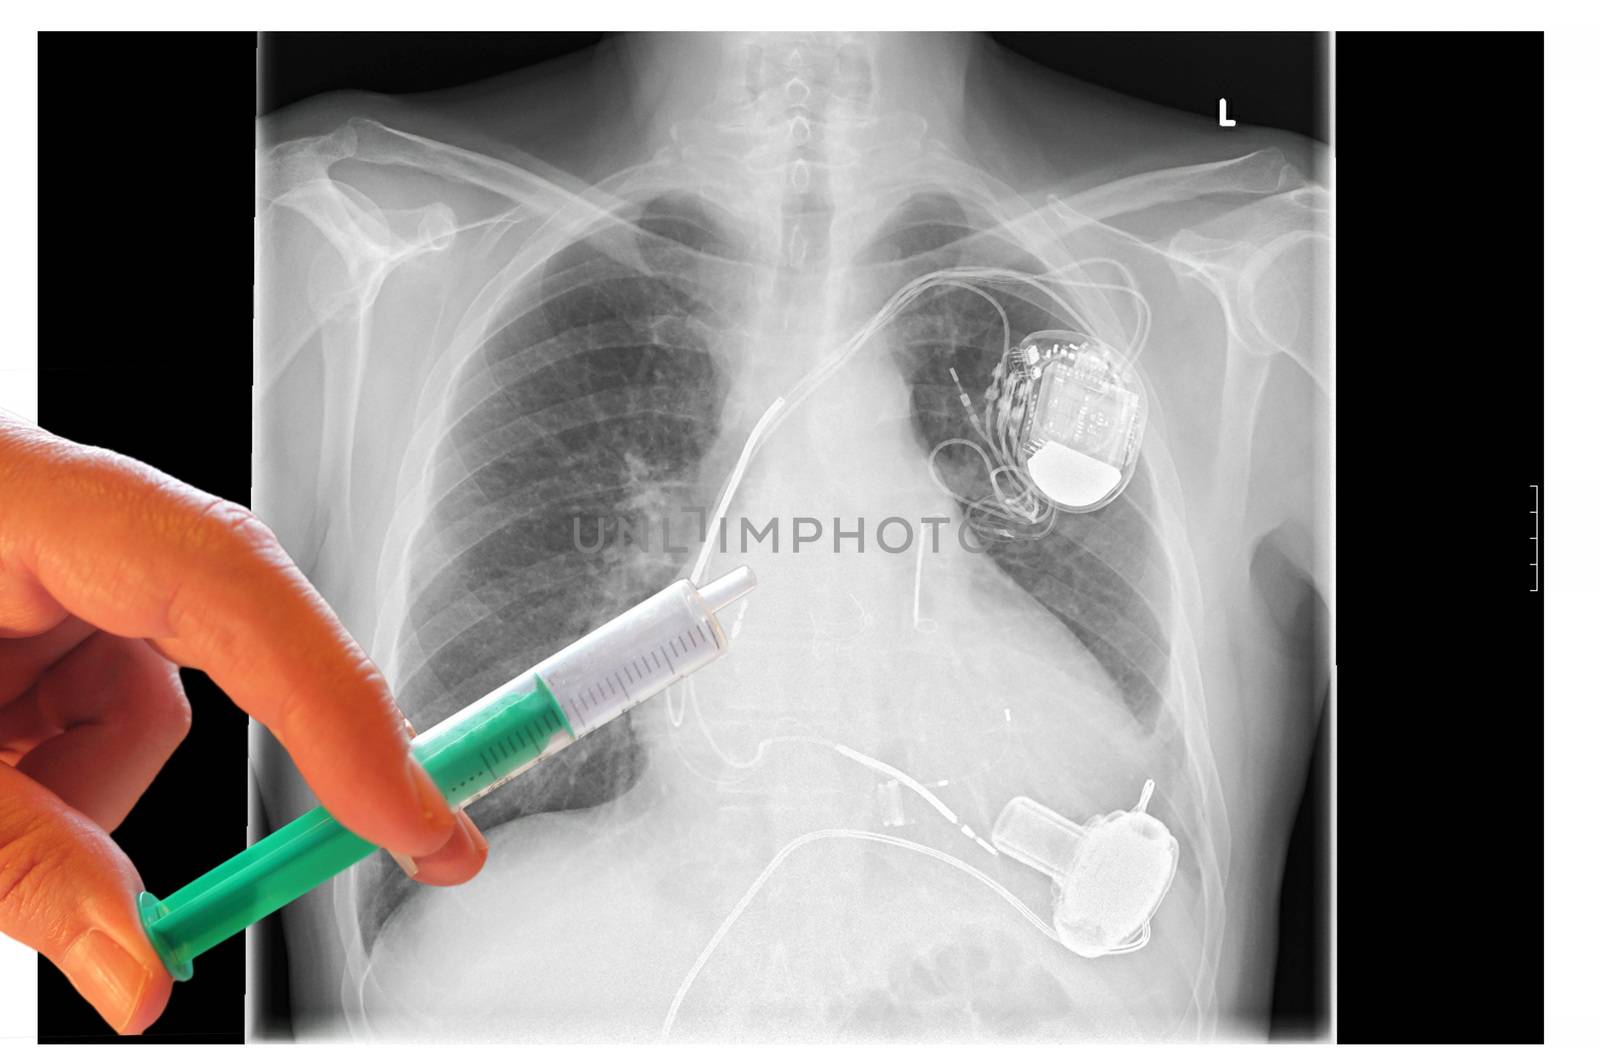 X-ray left side of the chest. Vergößertes heart with implanted pacemaker system. Below are the pump of the heart assist system. Hand with syringe in the image.